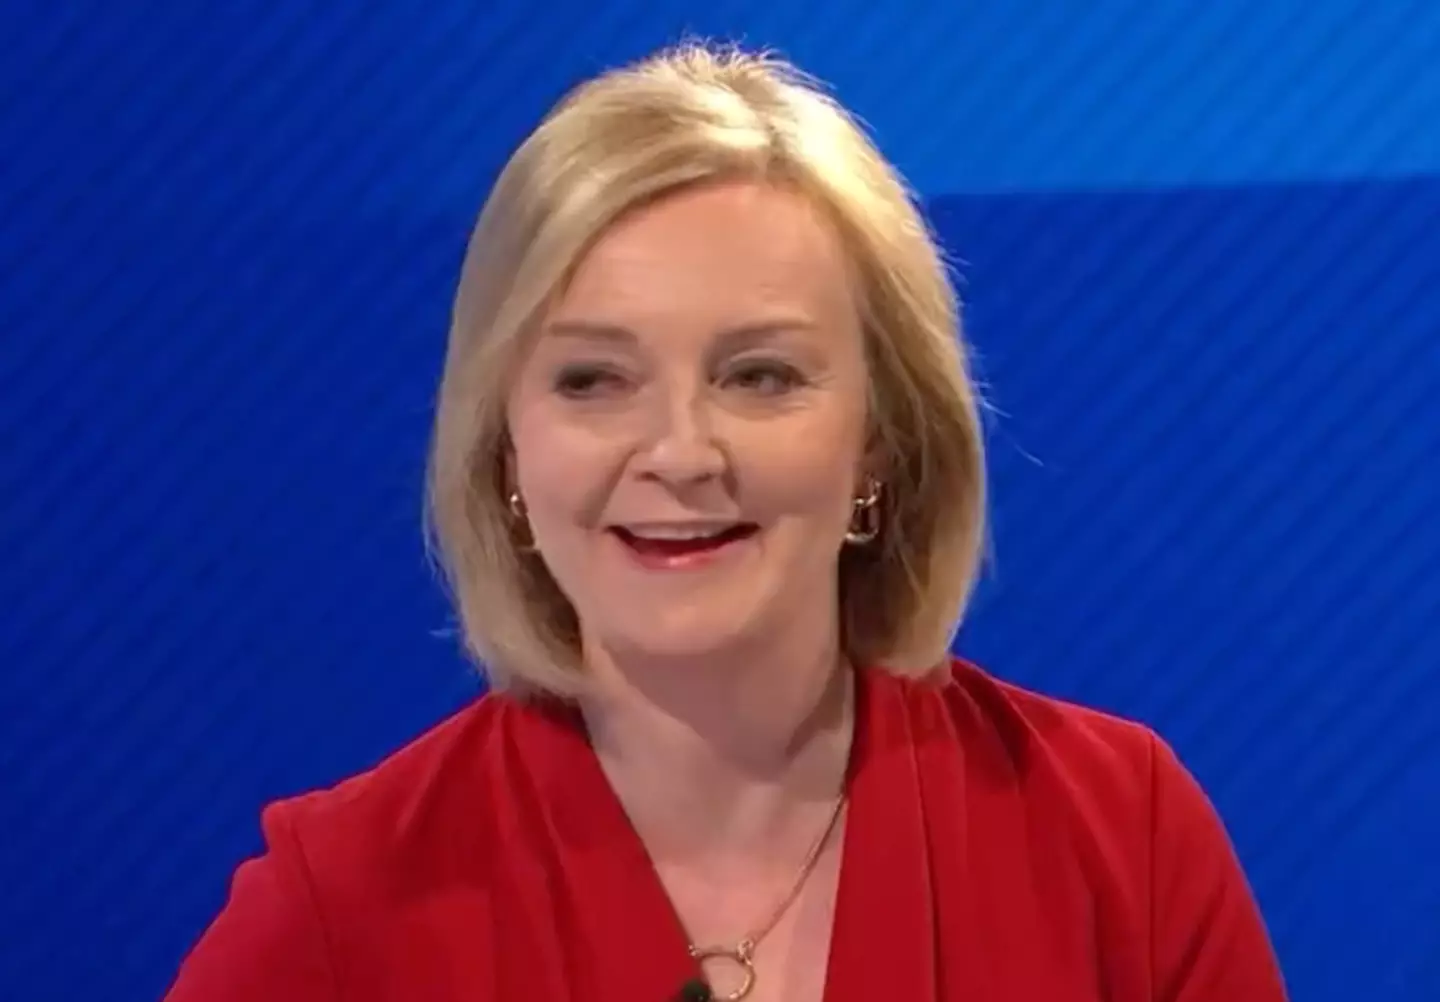 The Tory frontrunner was asked about the 'naughtiest' thing she's ever done during a Sky News special.